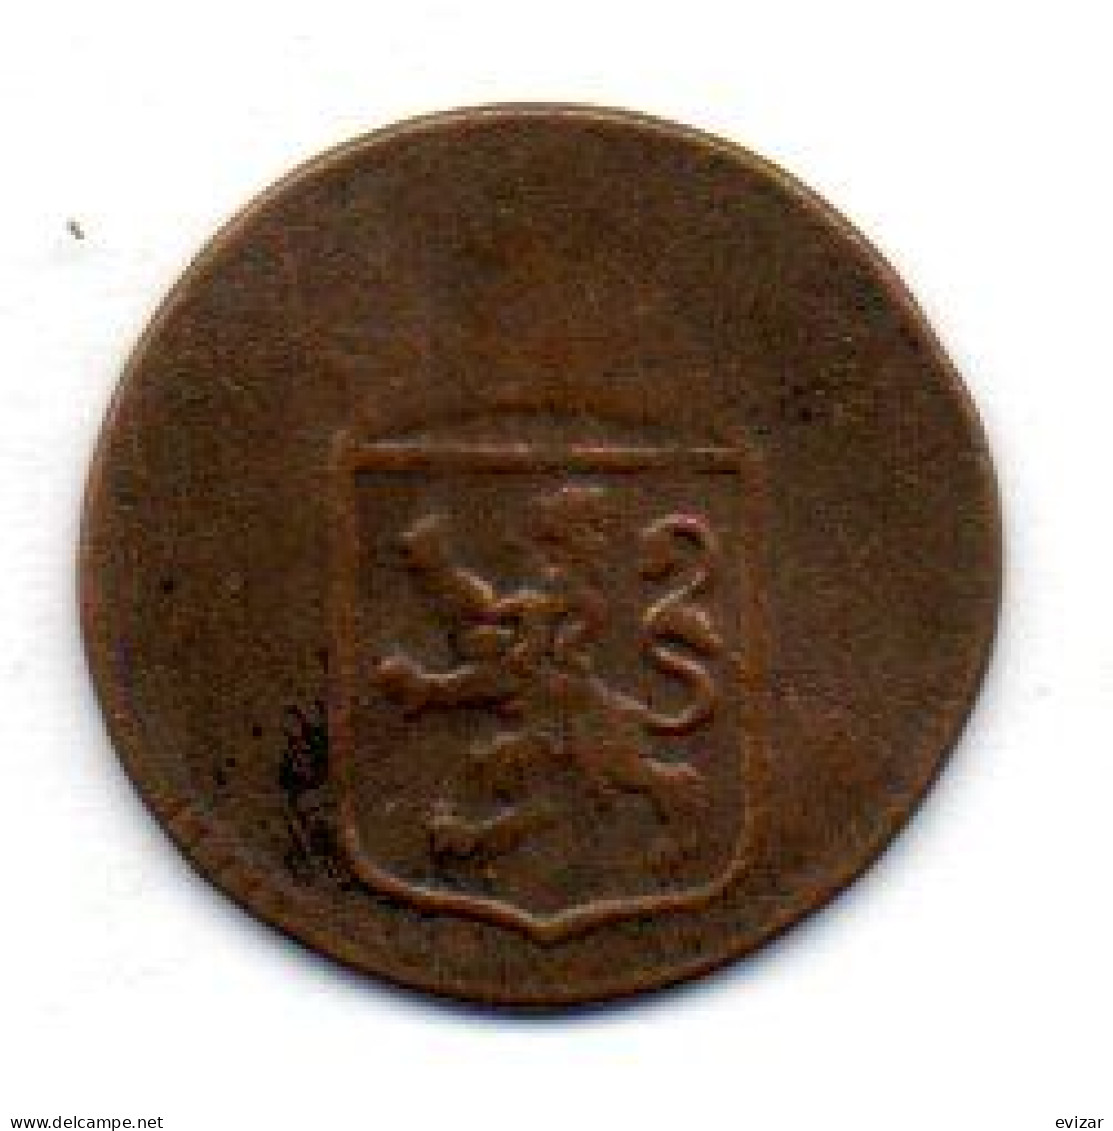 NETHERLAND INDONESIA - HOLLAND, 1 Duit, Copper, Year 1770, KM # 72 - Indonesien